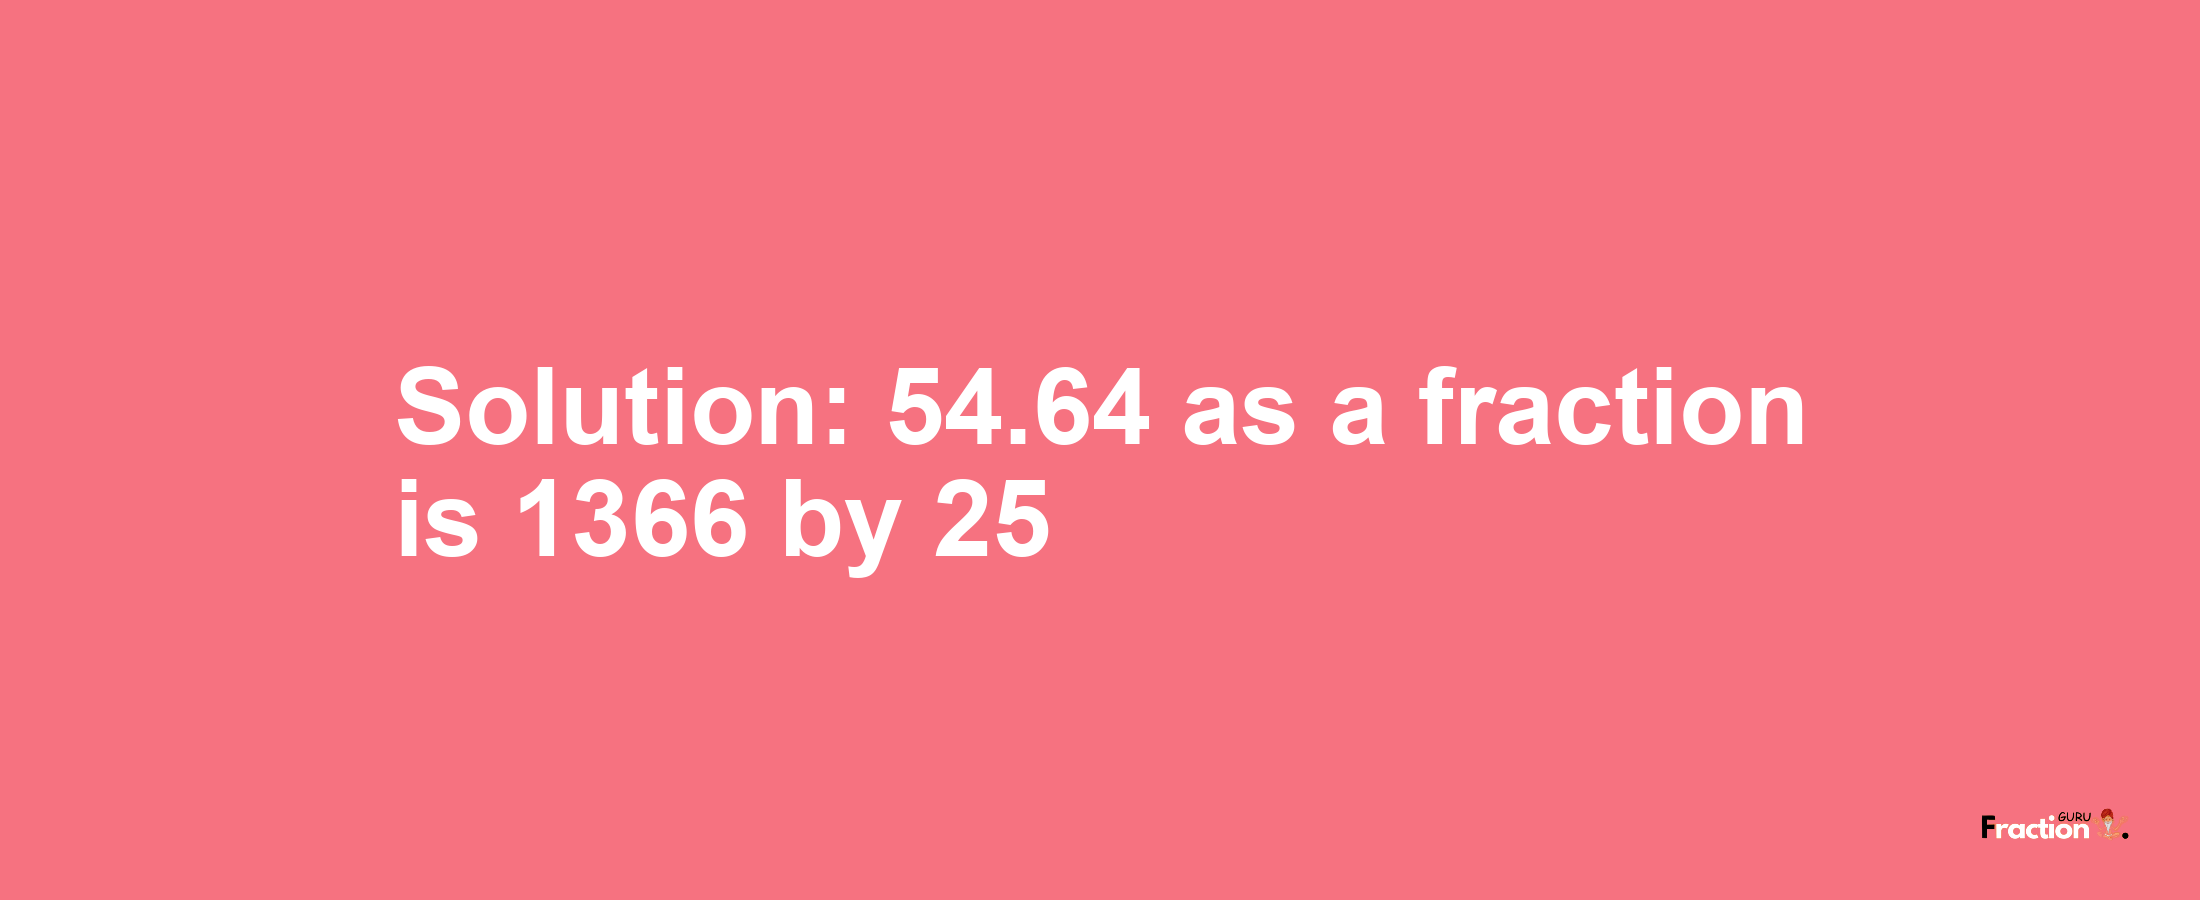 Solution:54.64 as a fraction is 1366/25